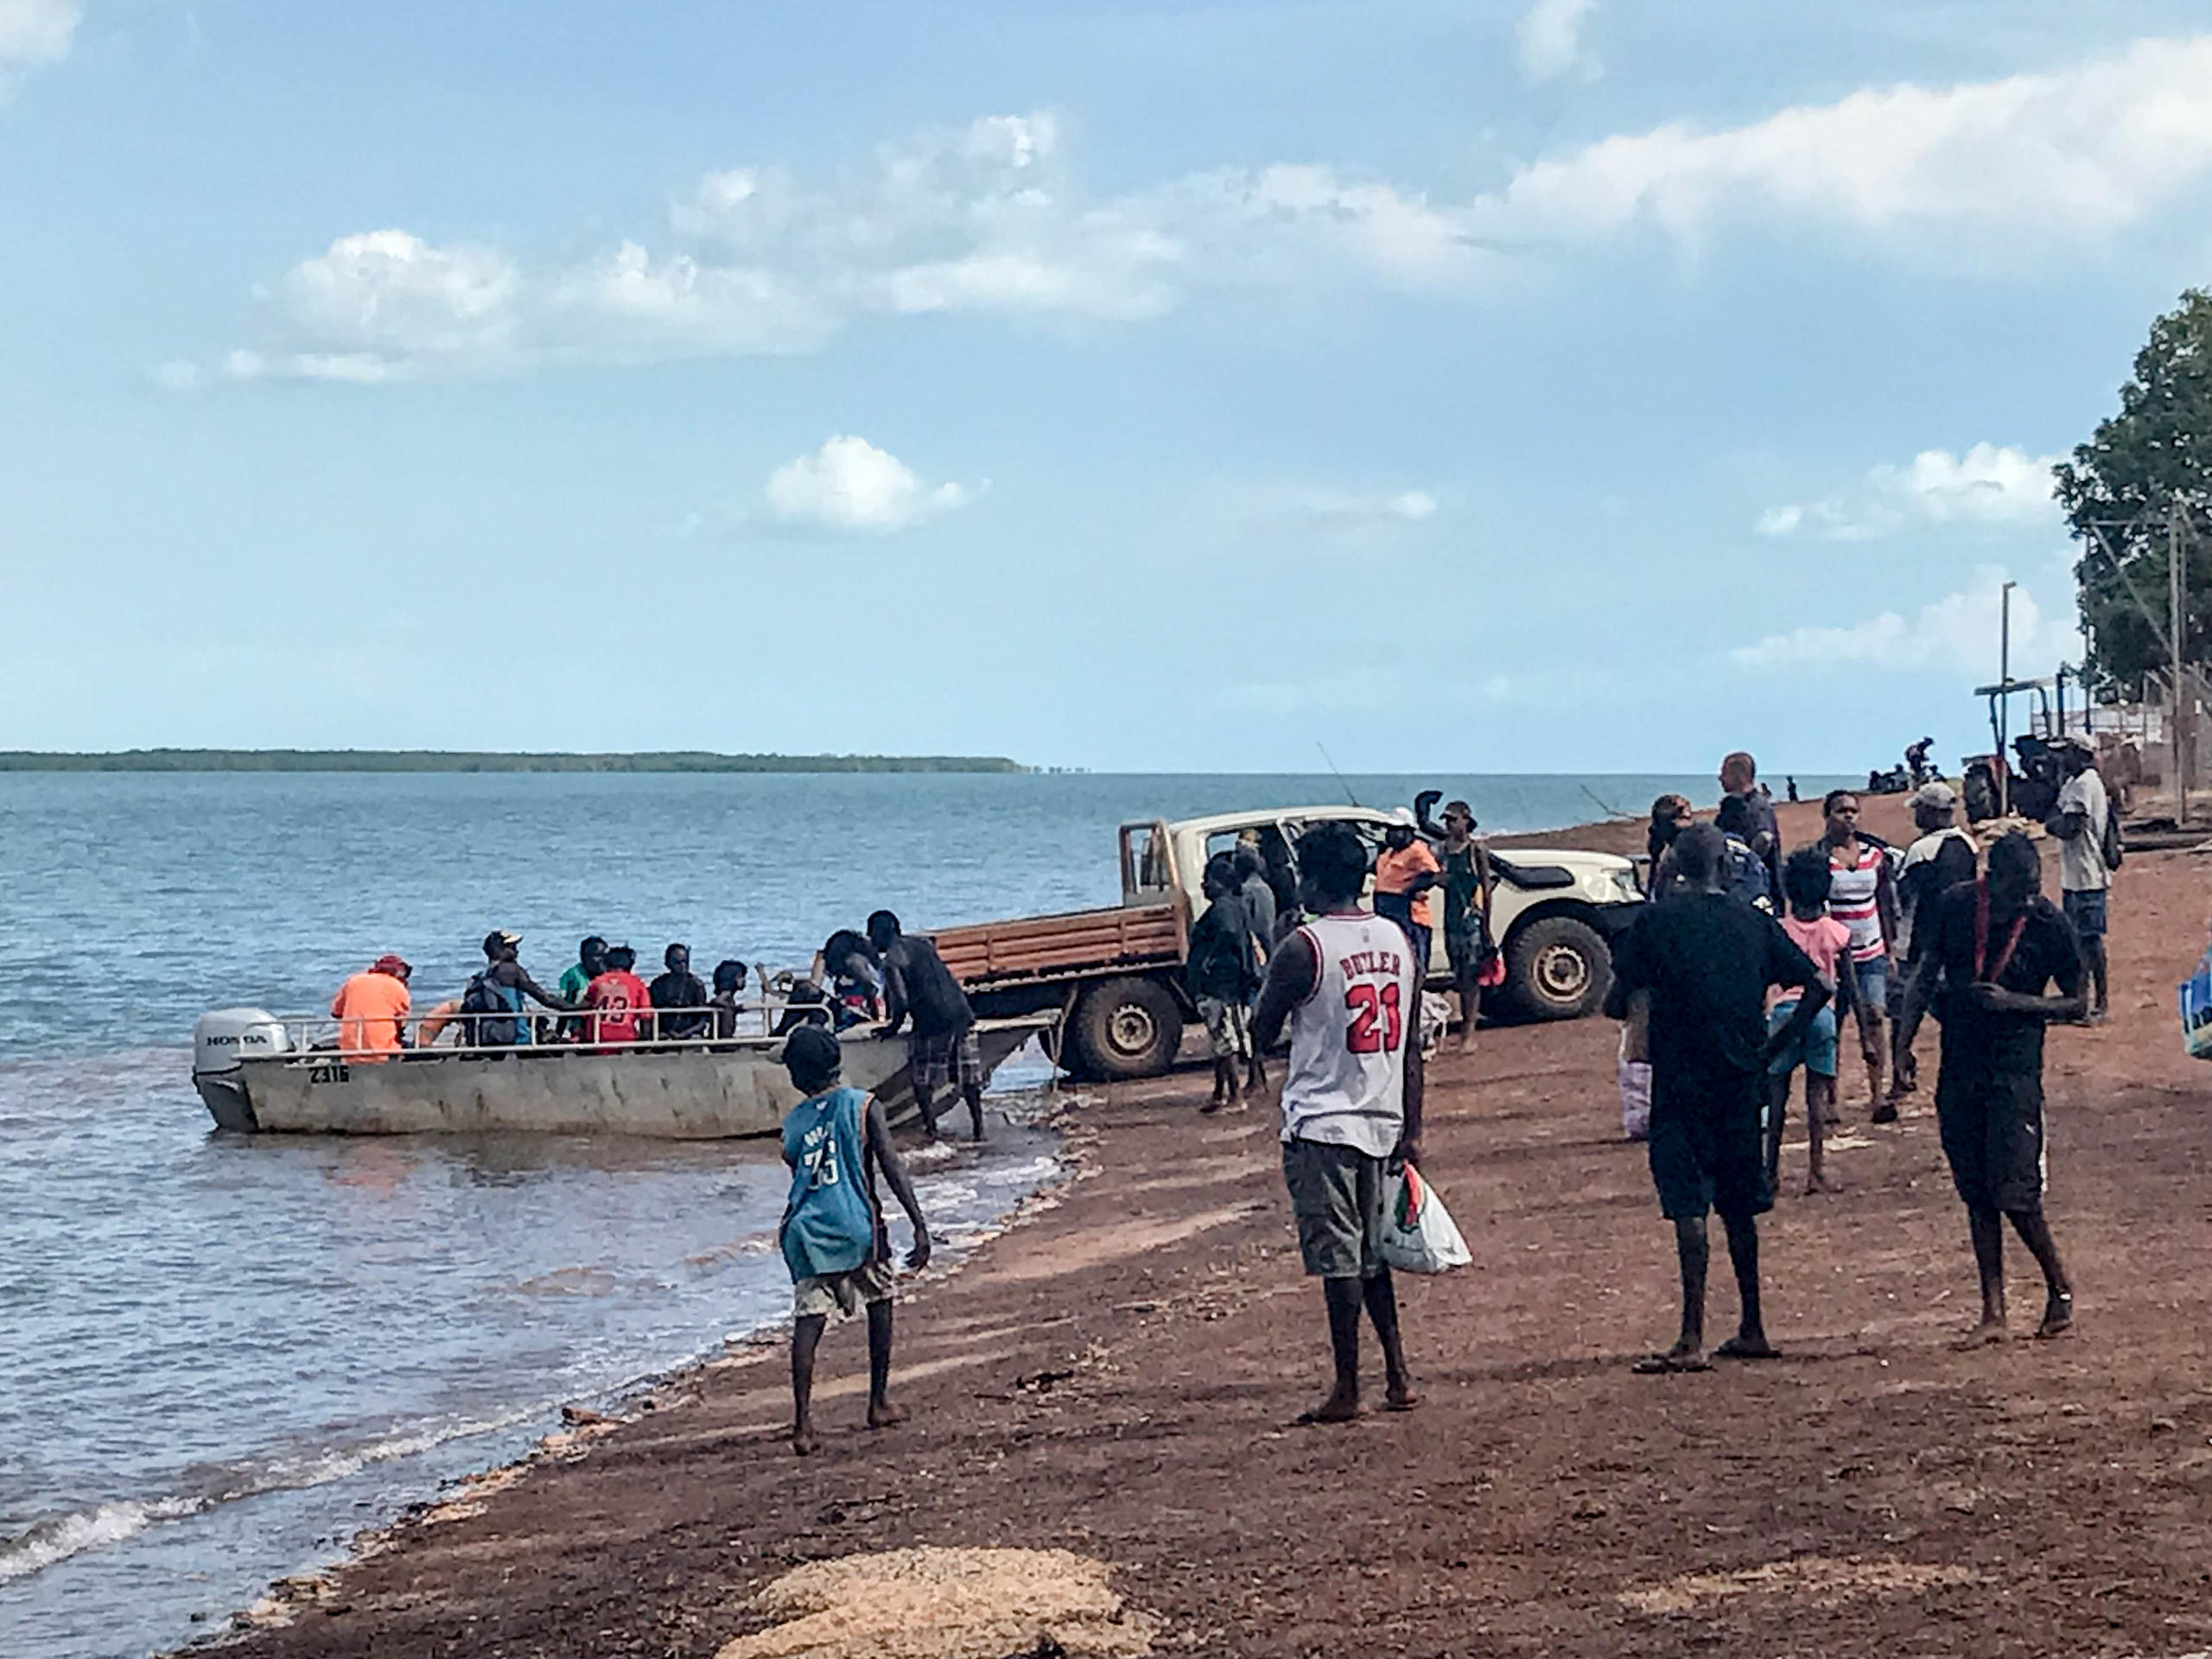 People standing on a beach with people boarding a small boat and a flat bed truck